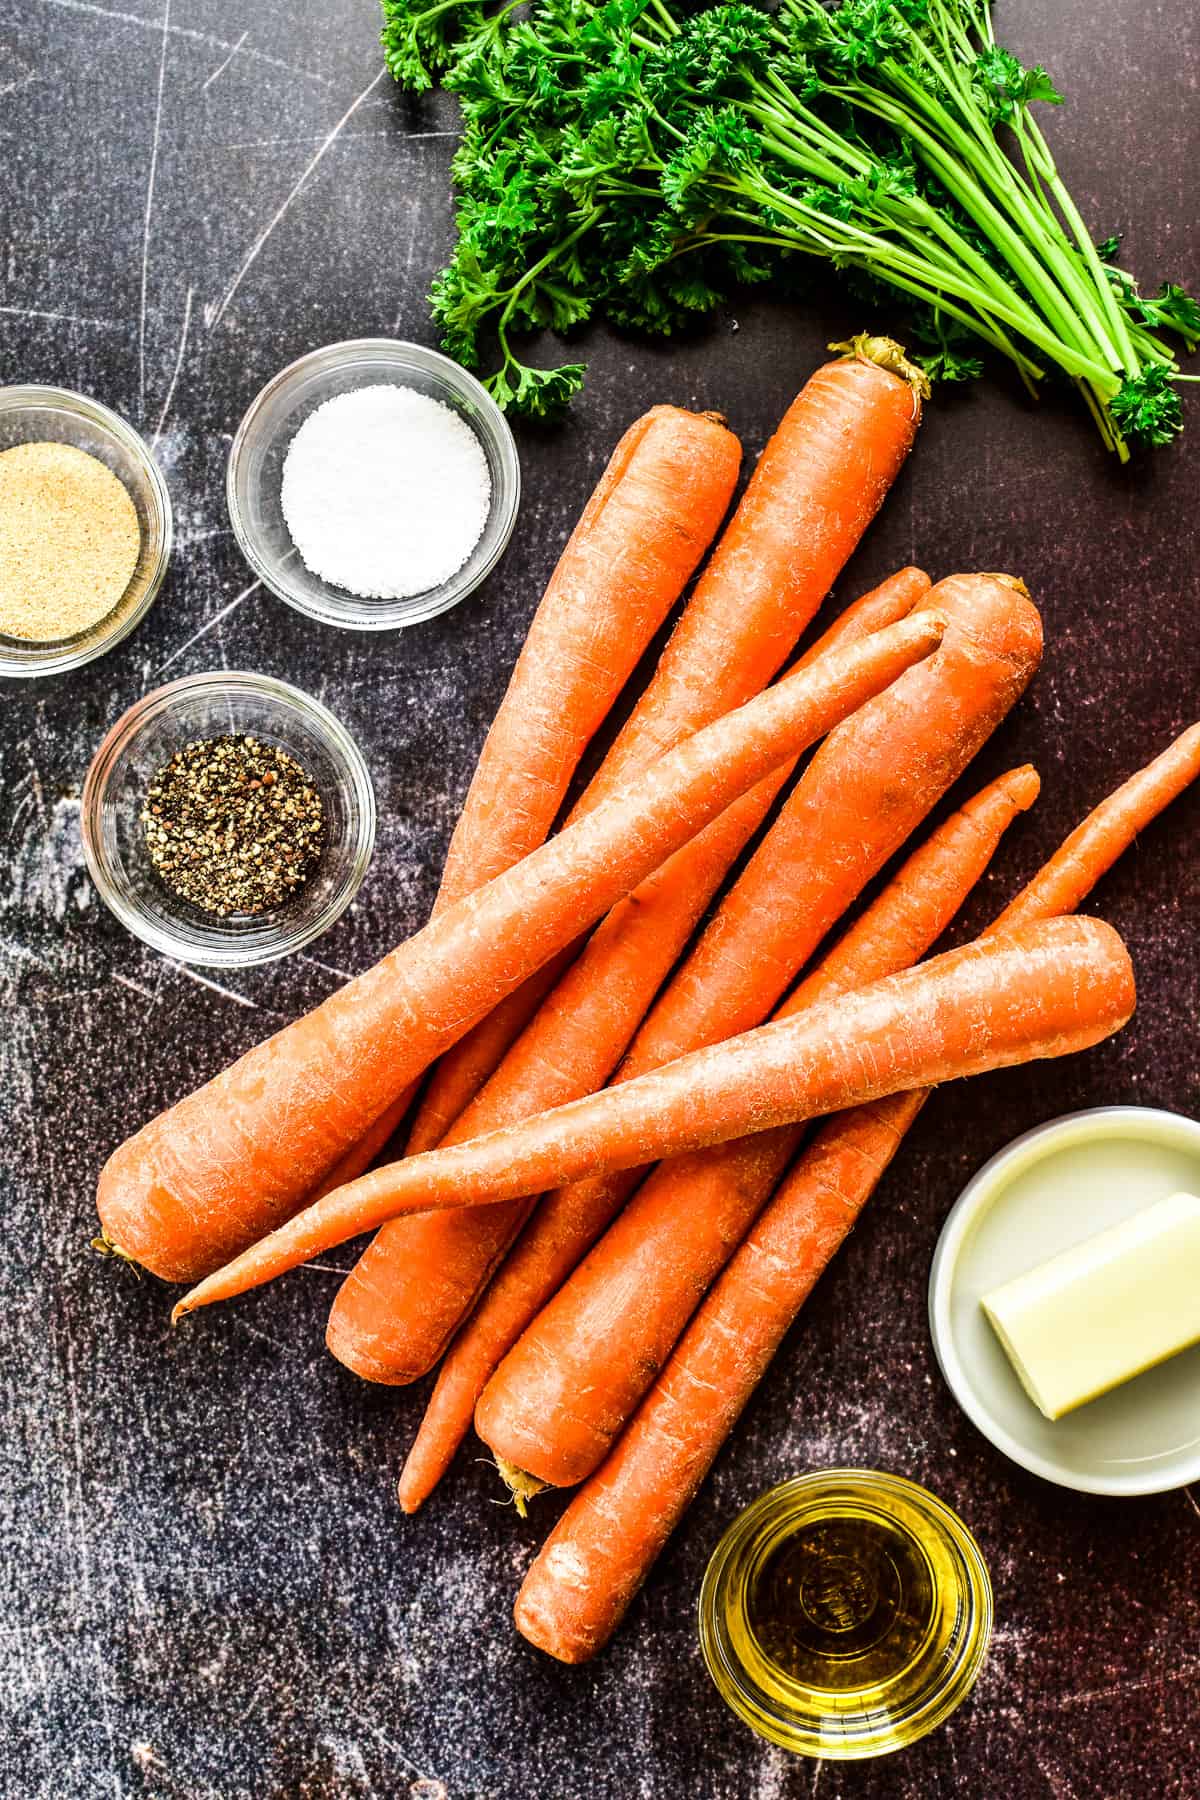 Ingredients for Roasted Carrots